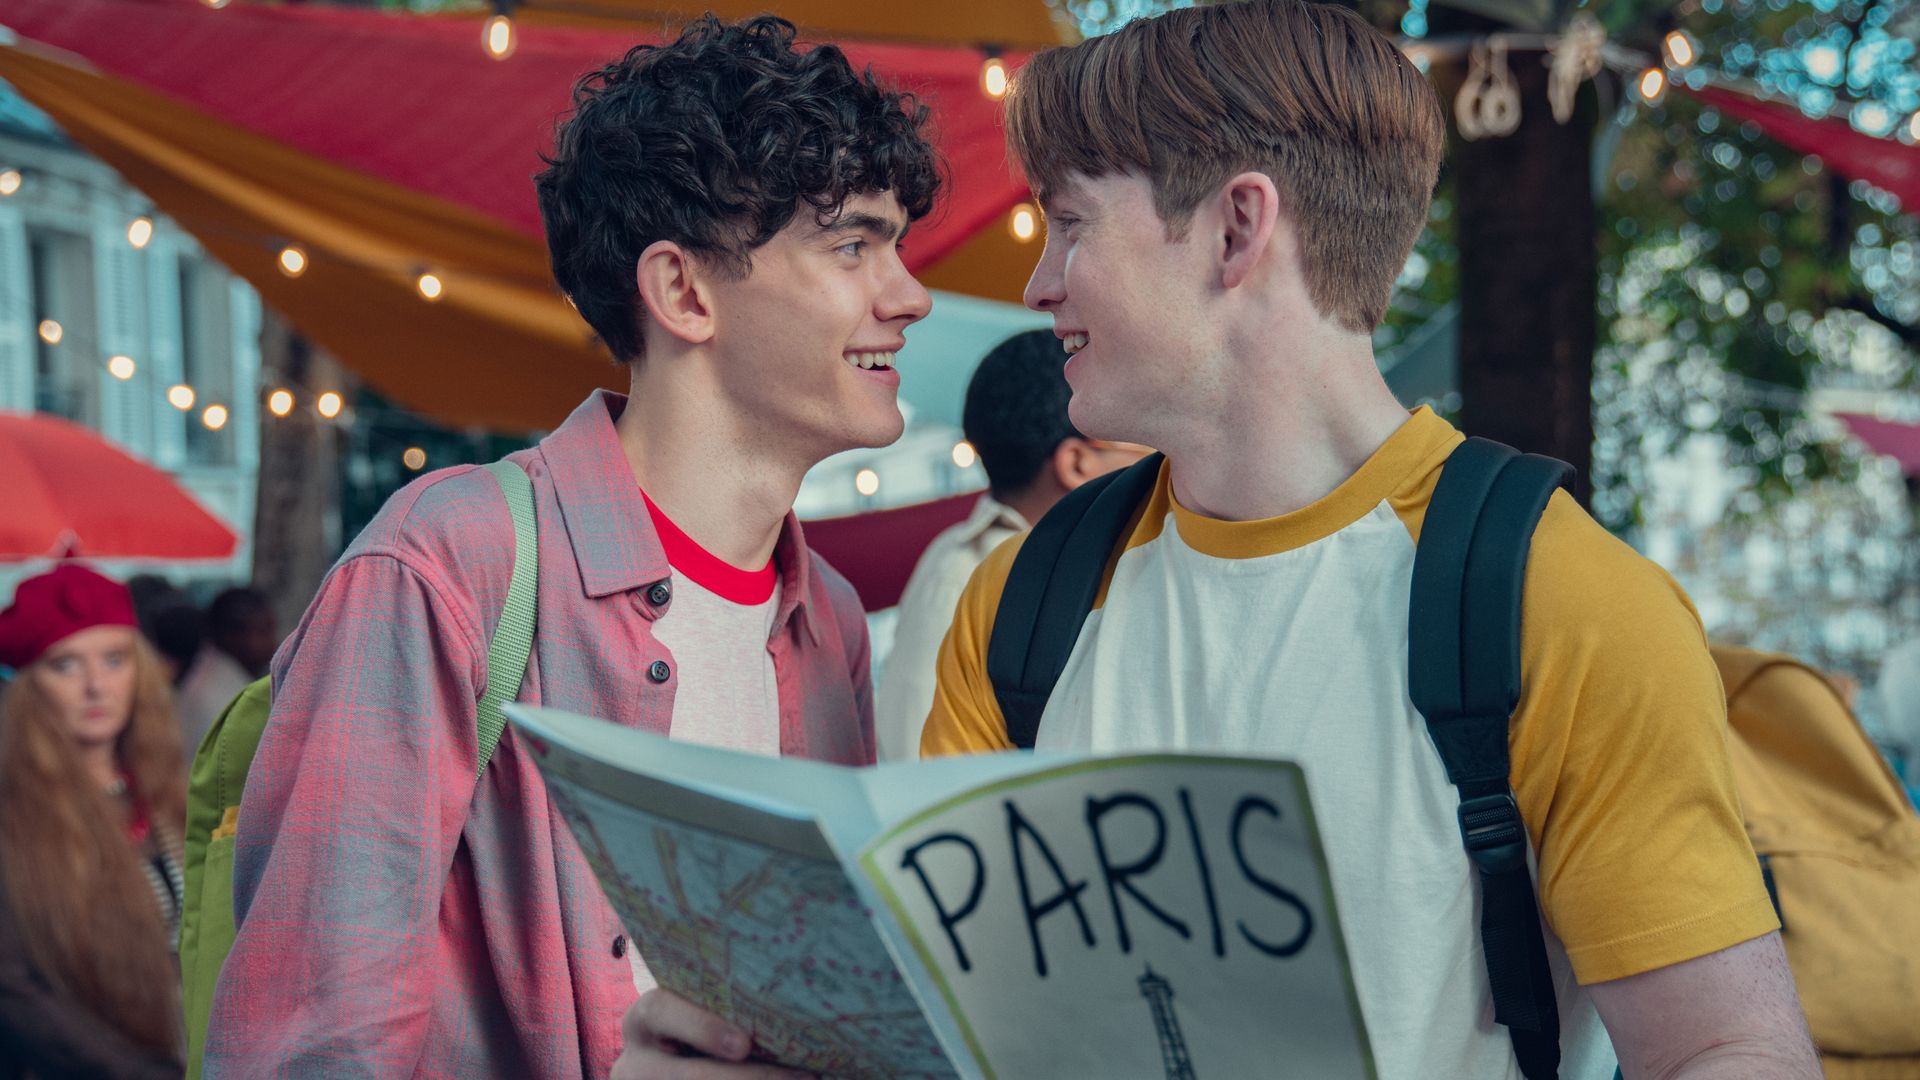 Charlie and Nick grinning at each other, Nick is holding a map of Paris